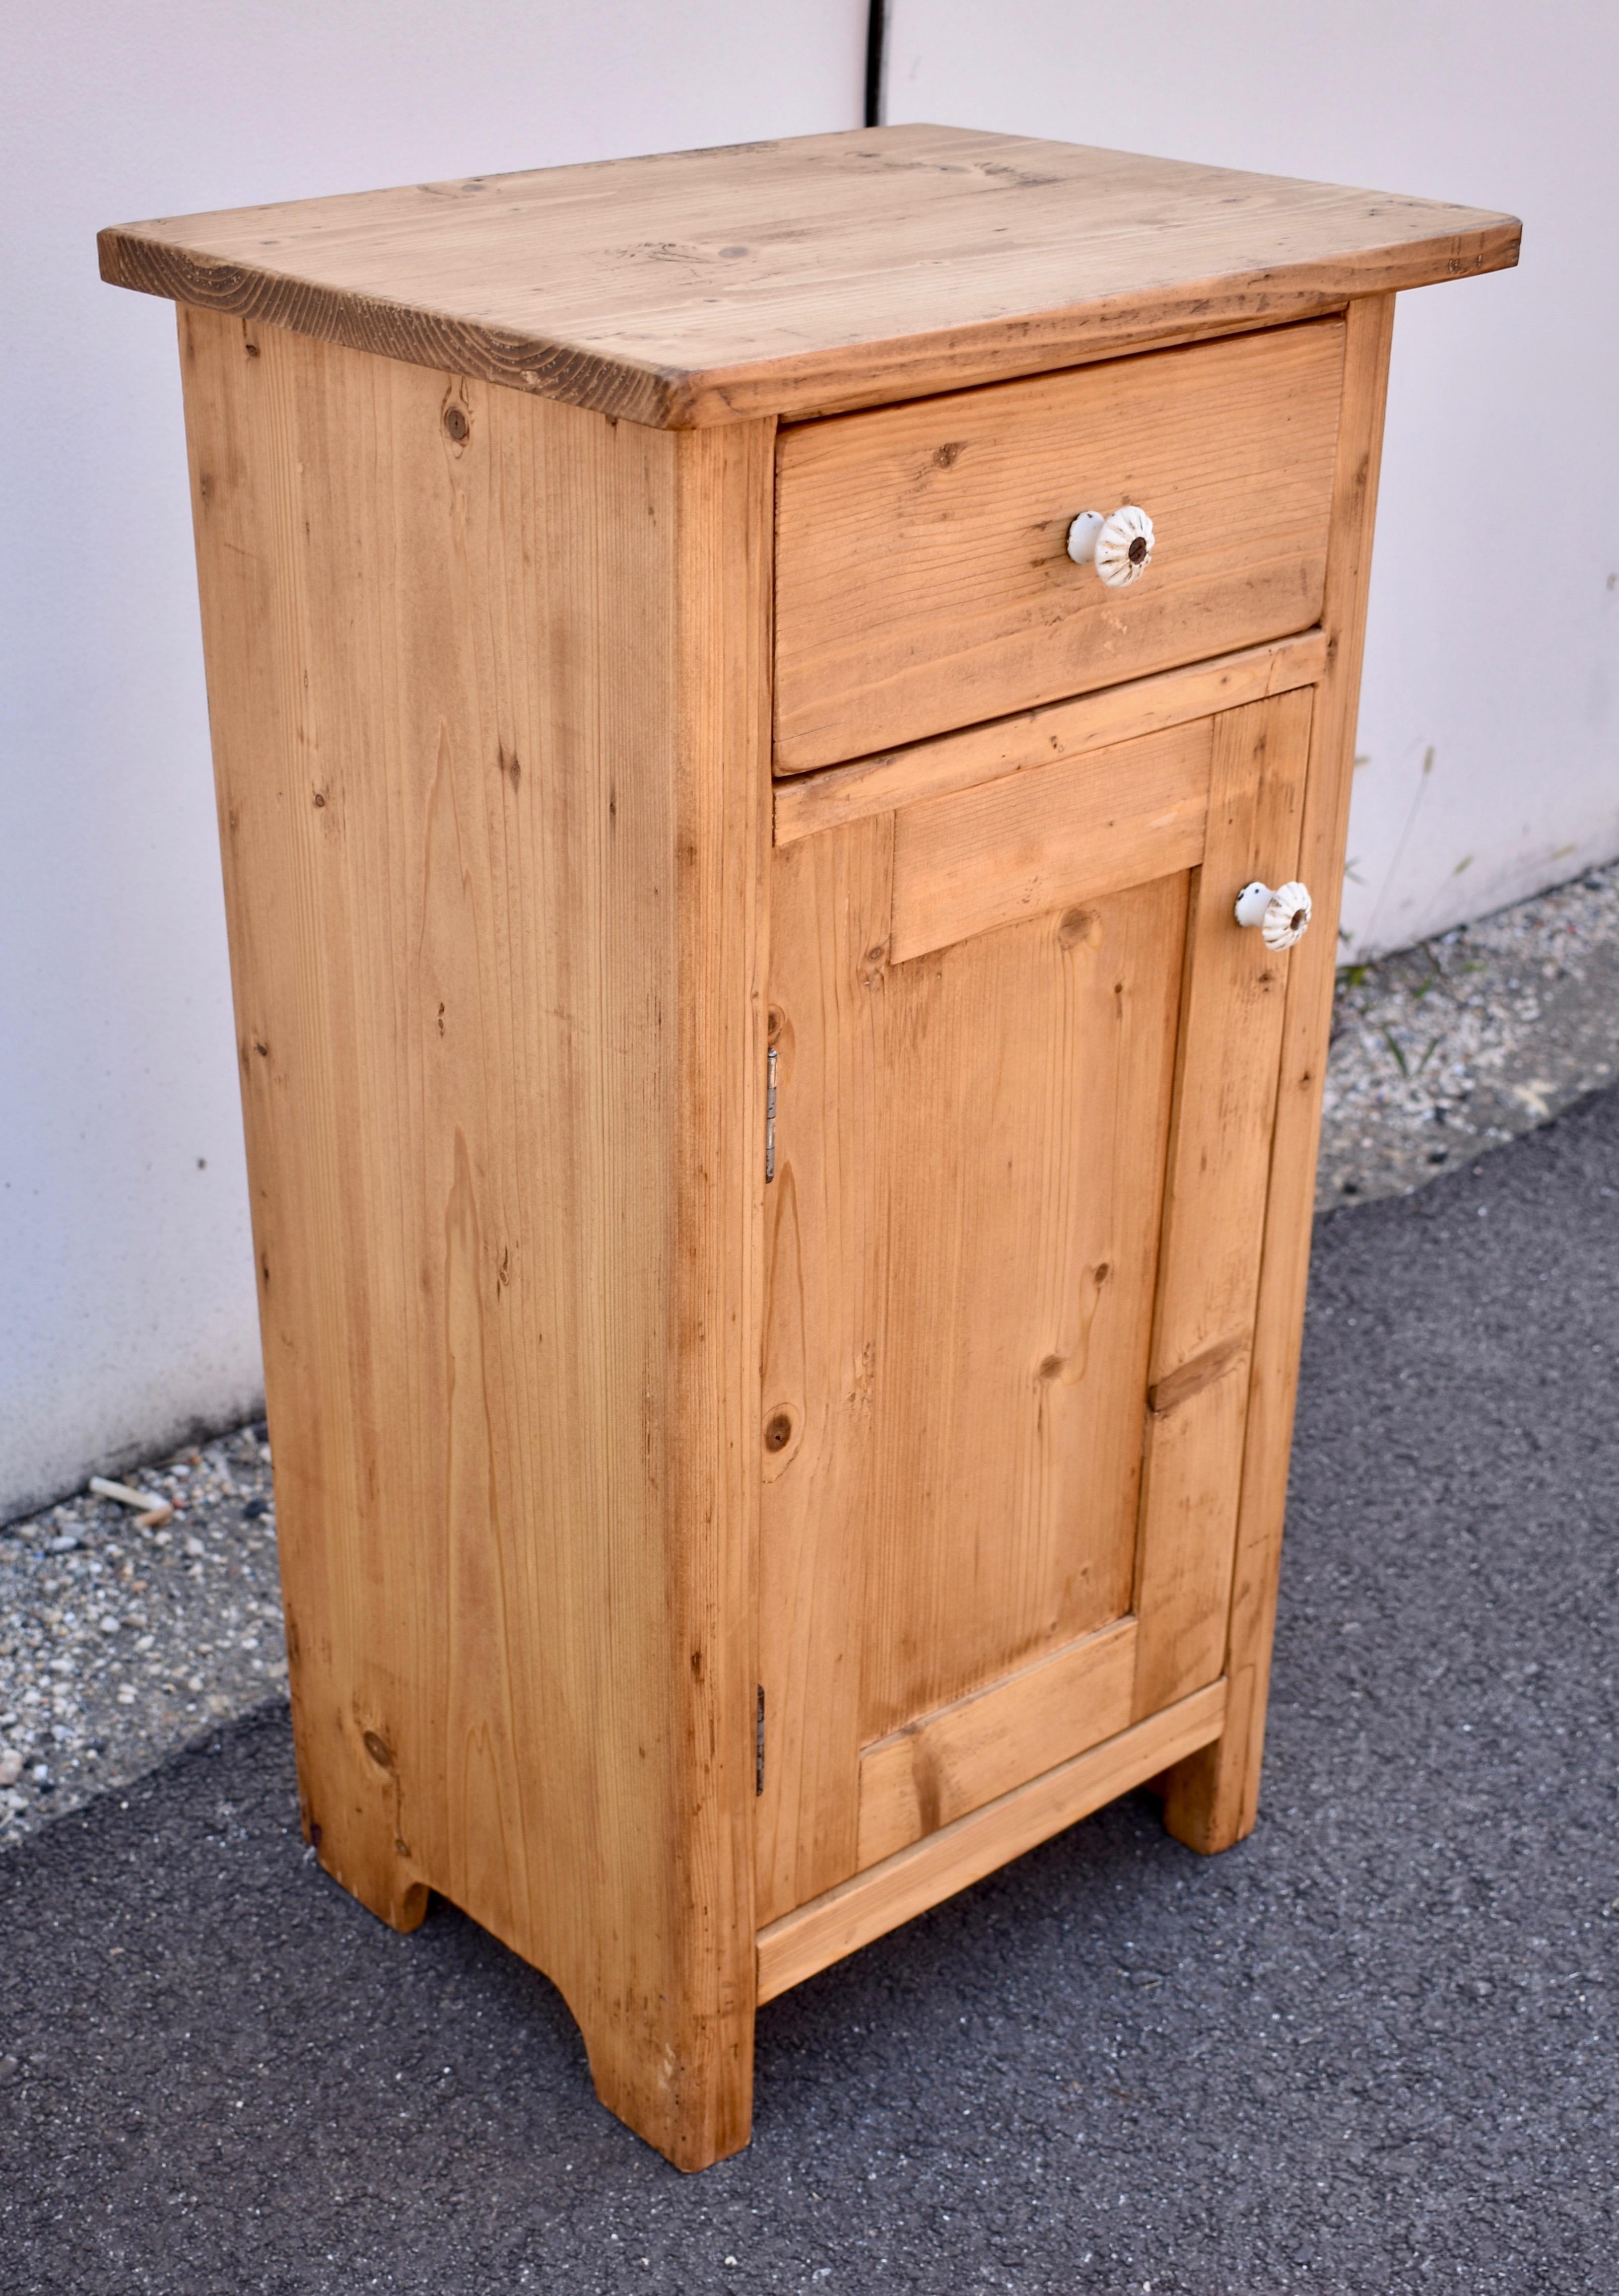 This is a plain and simple pine nightstand with nice clean lines in the usual one door one drawer configuration.  The wood is fairly clear with a lovely warm color.  The top front corners are slightly rounded and the front corners of the case are